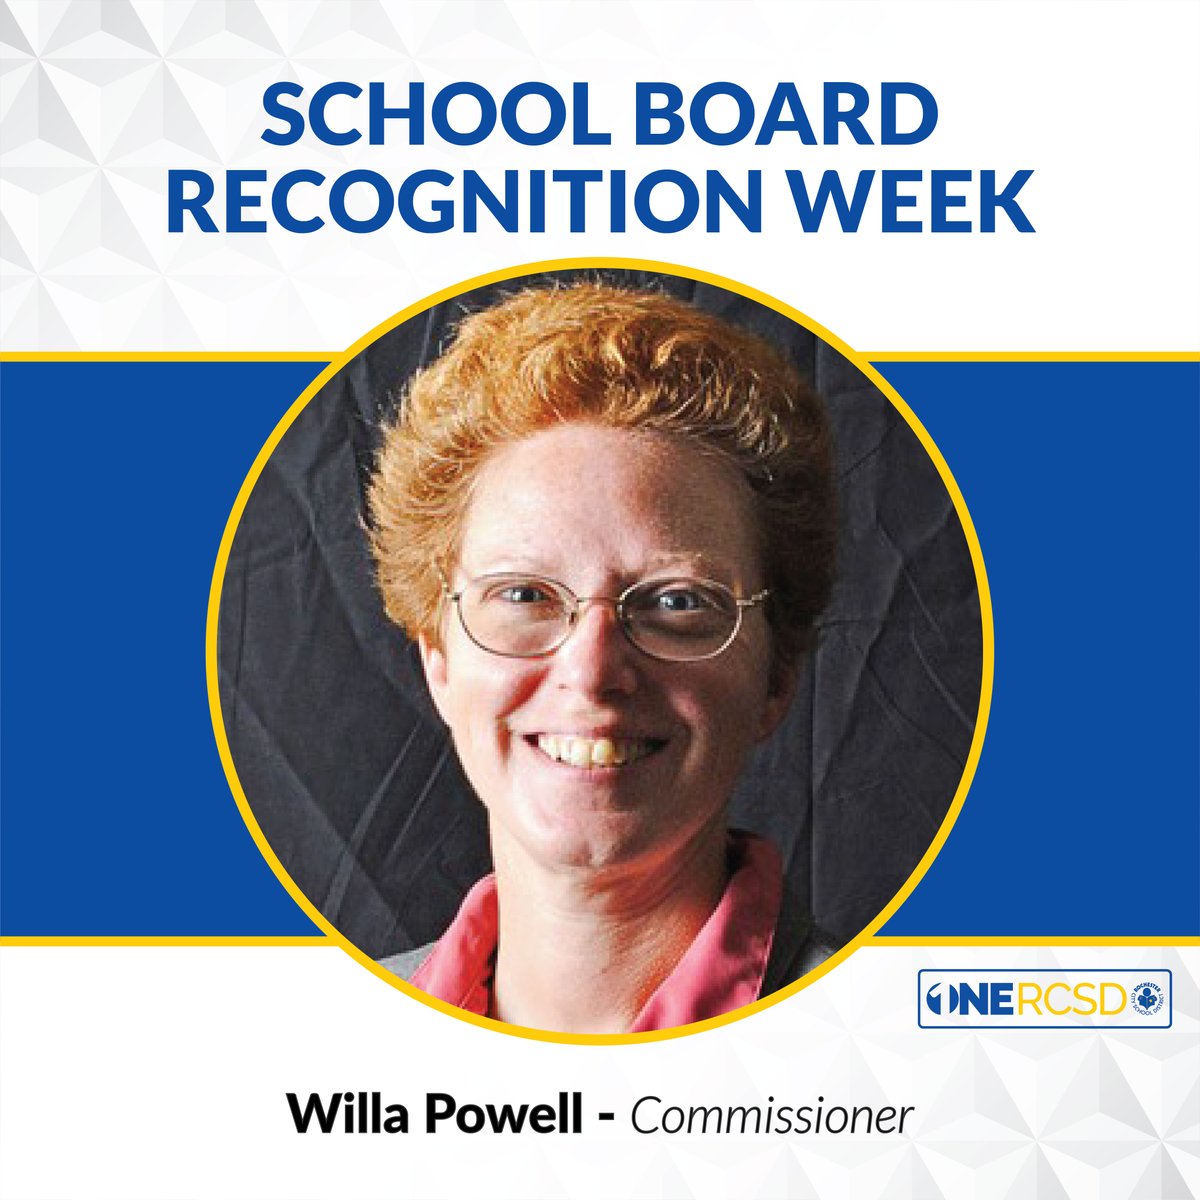 Commissioner Willa Powell, the Board’s longest-serving member, was first elected in 1997. She has been an advocate for strong leadership in Rochester schools, accountability for performance, and support for student achievement. All four of her children are RCSD graduates.